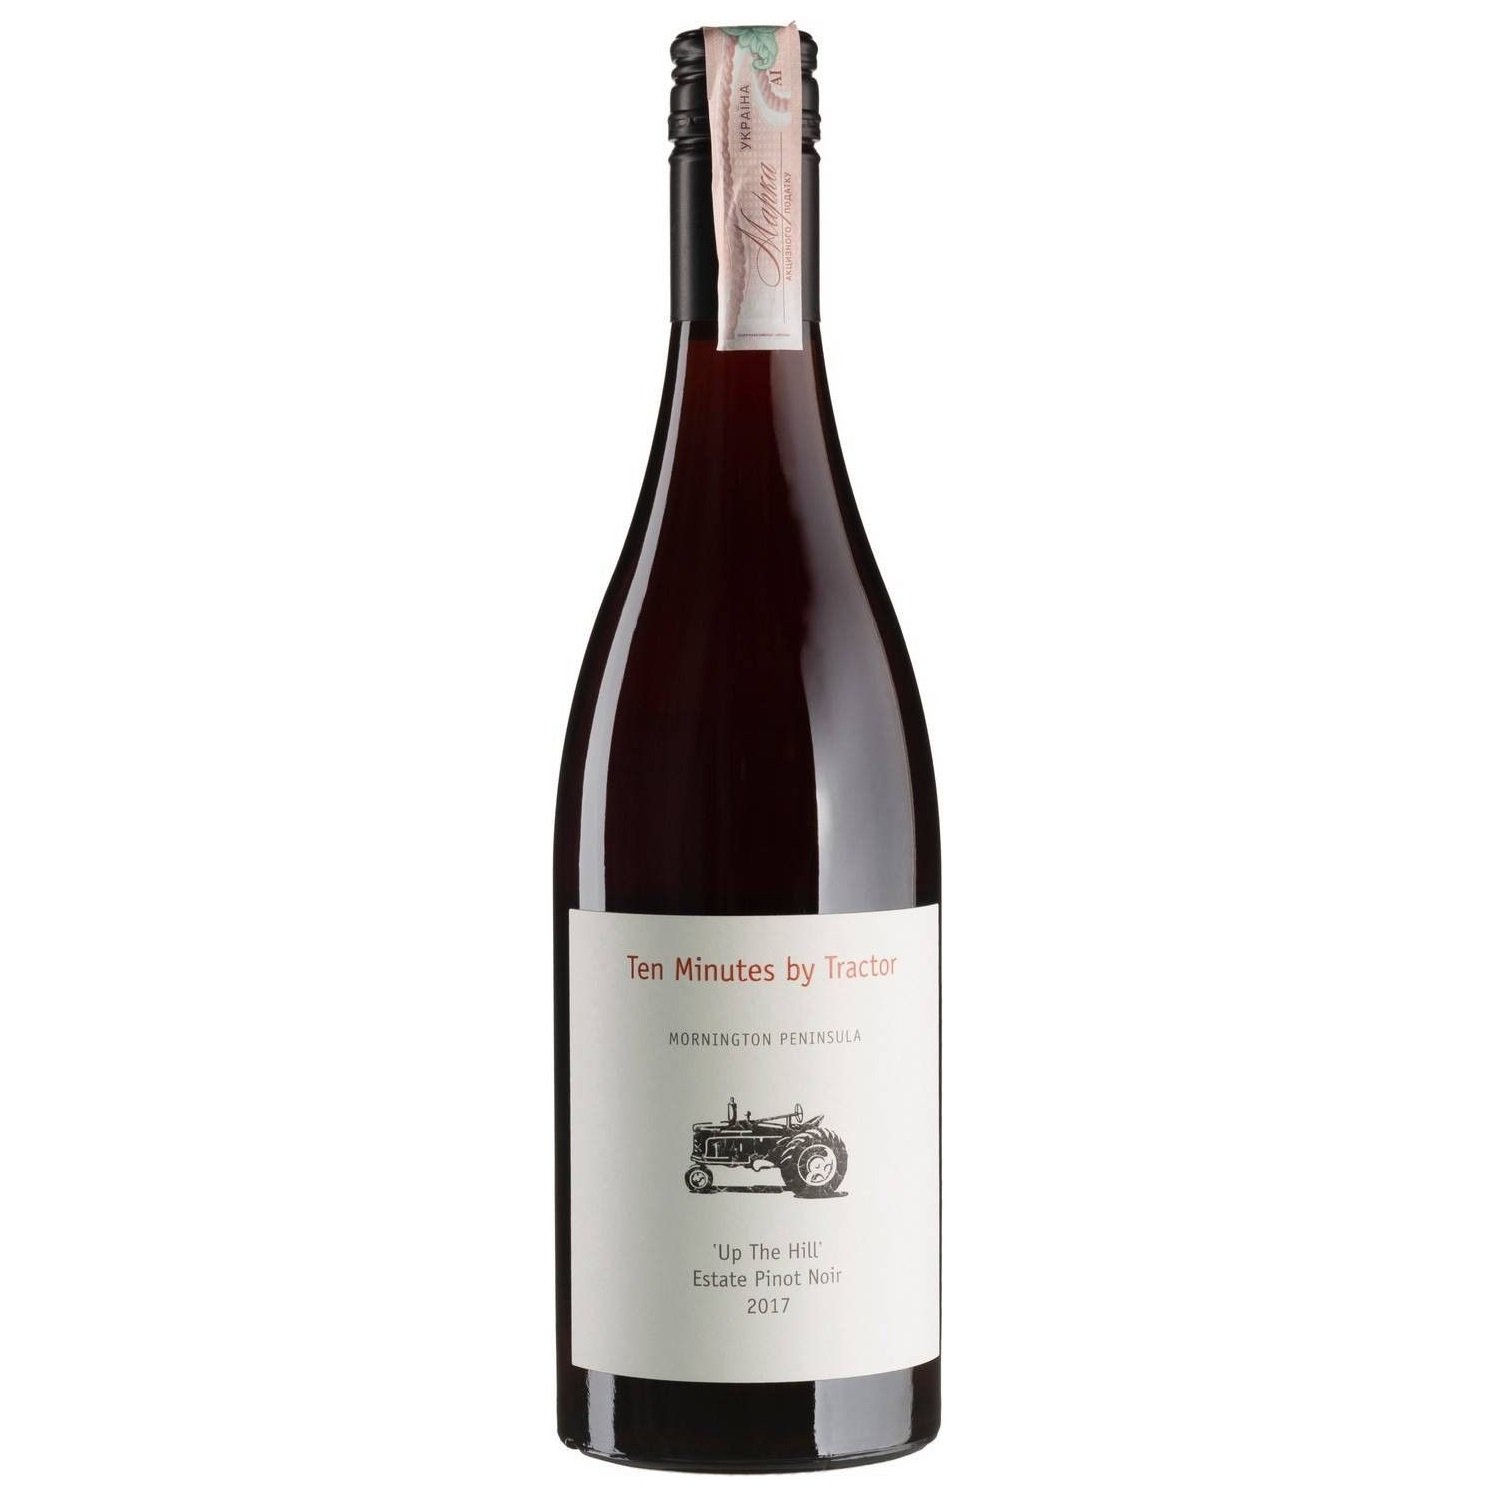 Вино Ten Minutes by Tractor Estate Pinot Noir Up The Hill 2019, красное, сухое, 0,75 л (W2319) - фото 1